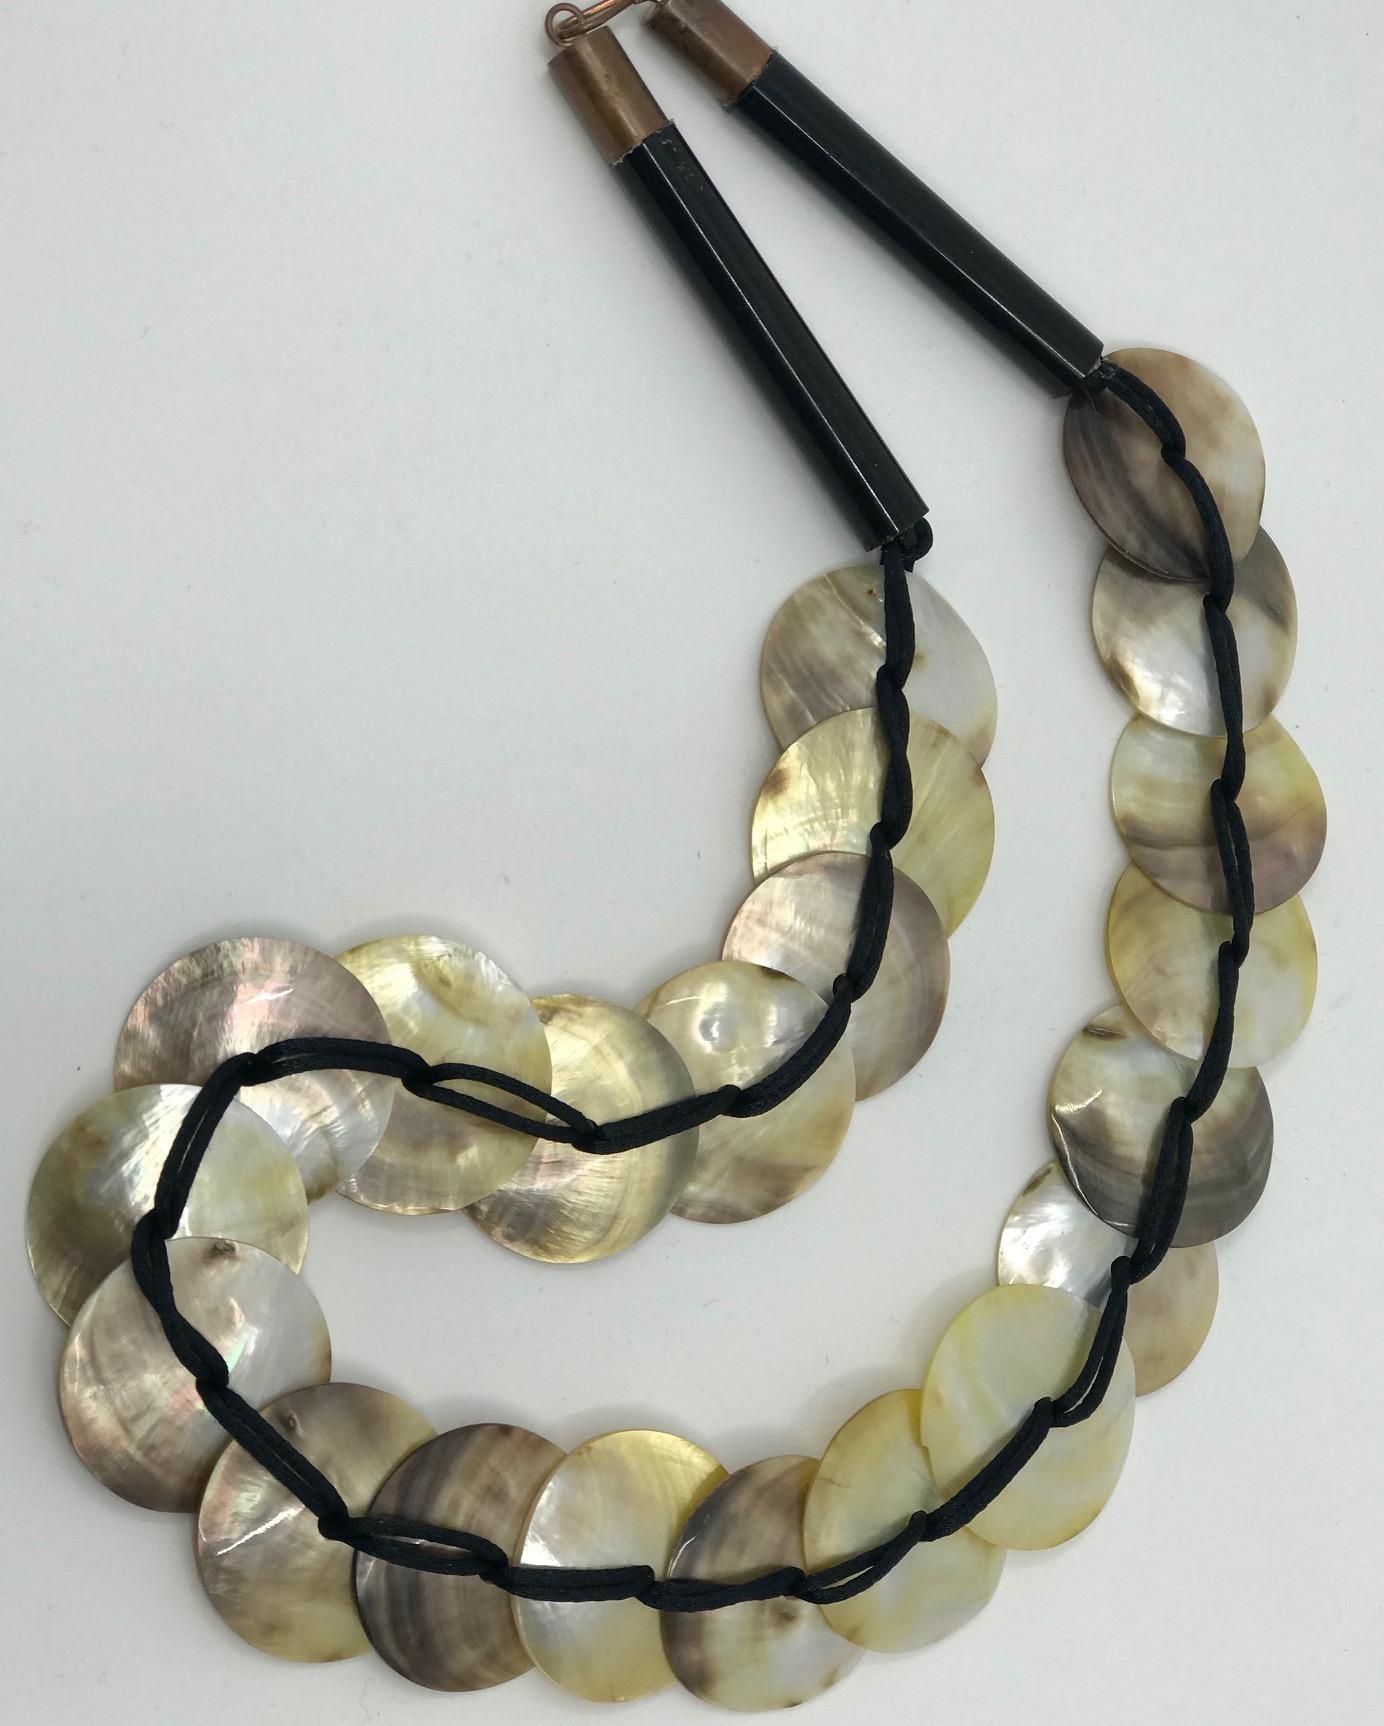  Mother of pearl Necklace consists of  Pinctada Margaritifera circles connected with a silk thread and finished with black acrylic tubes and copper closures. This necklace can be worn on two sides . The Silver side is the inside of the shell. The